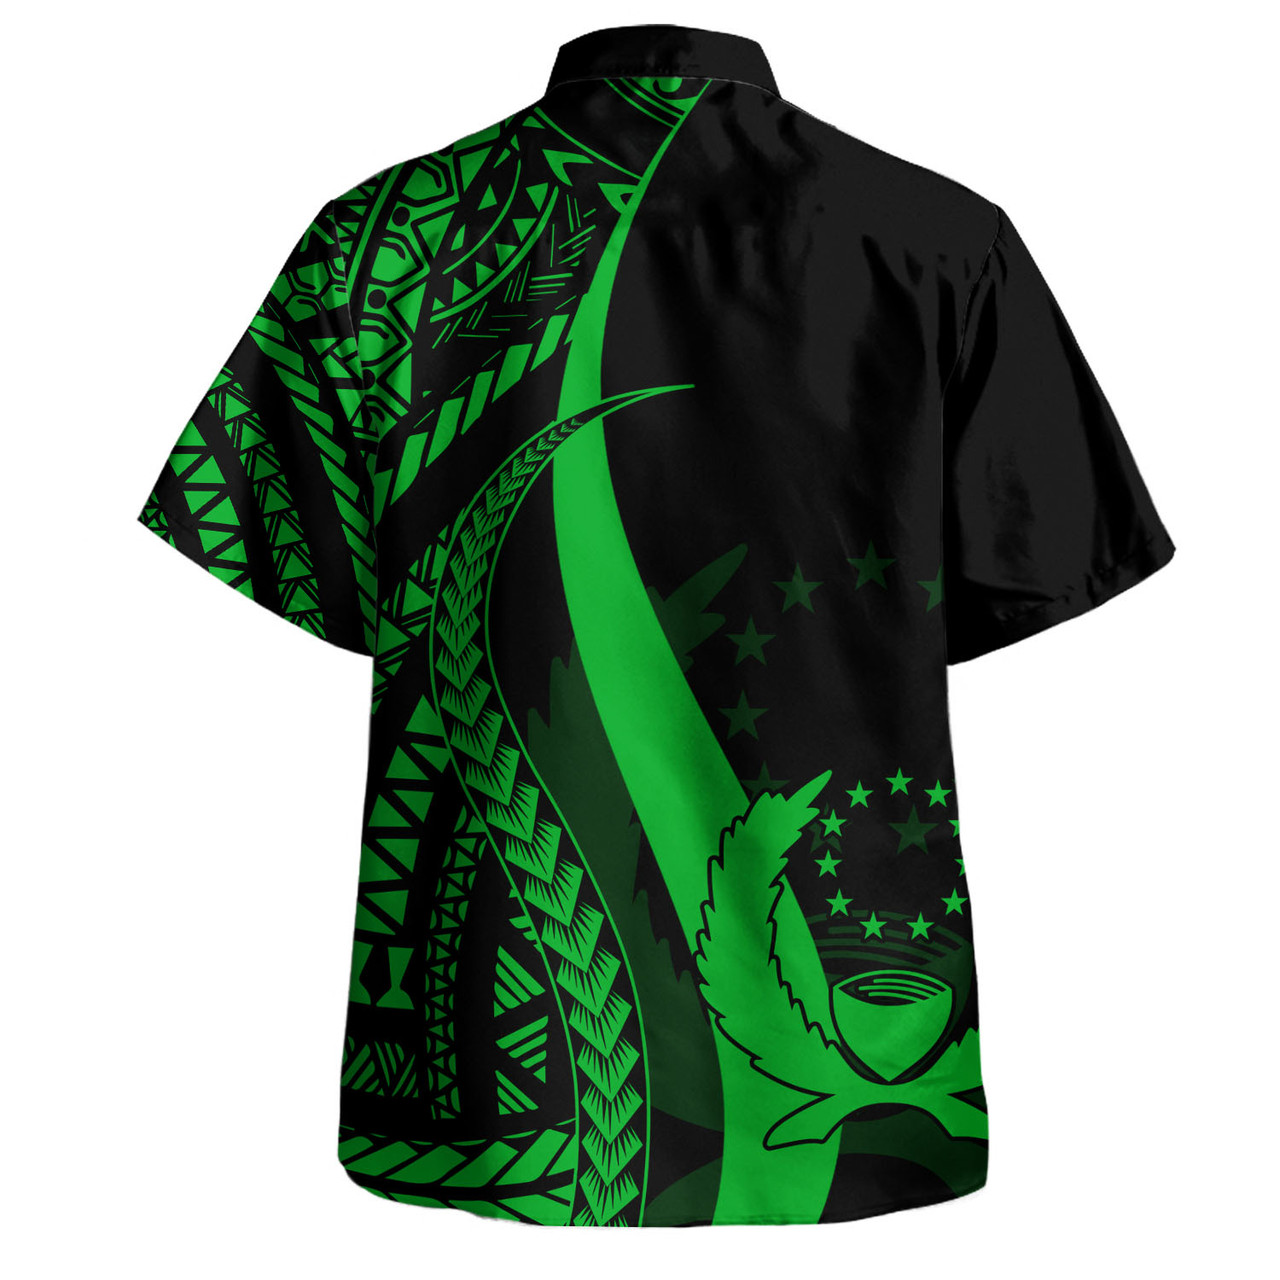 Pohnpei Combo Dress And Shirt - Micronesian Tentacle Tribal Pattern Green